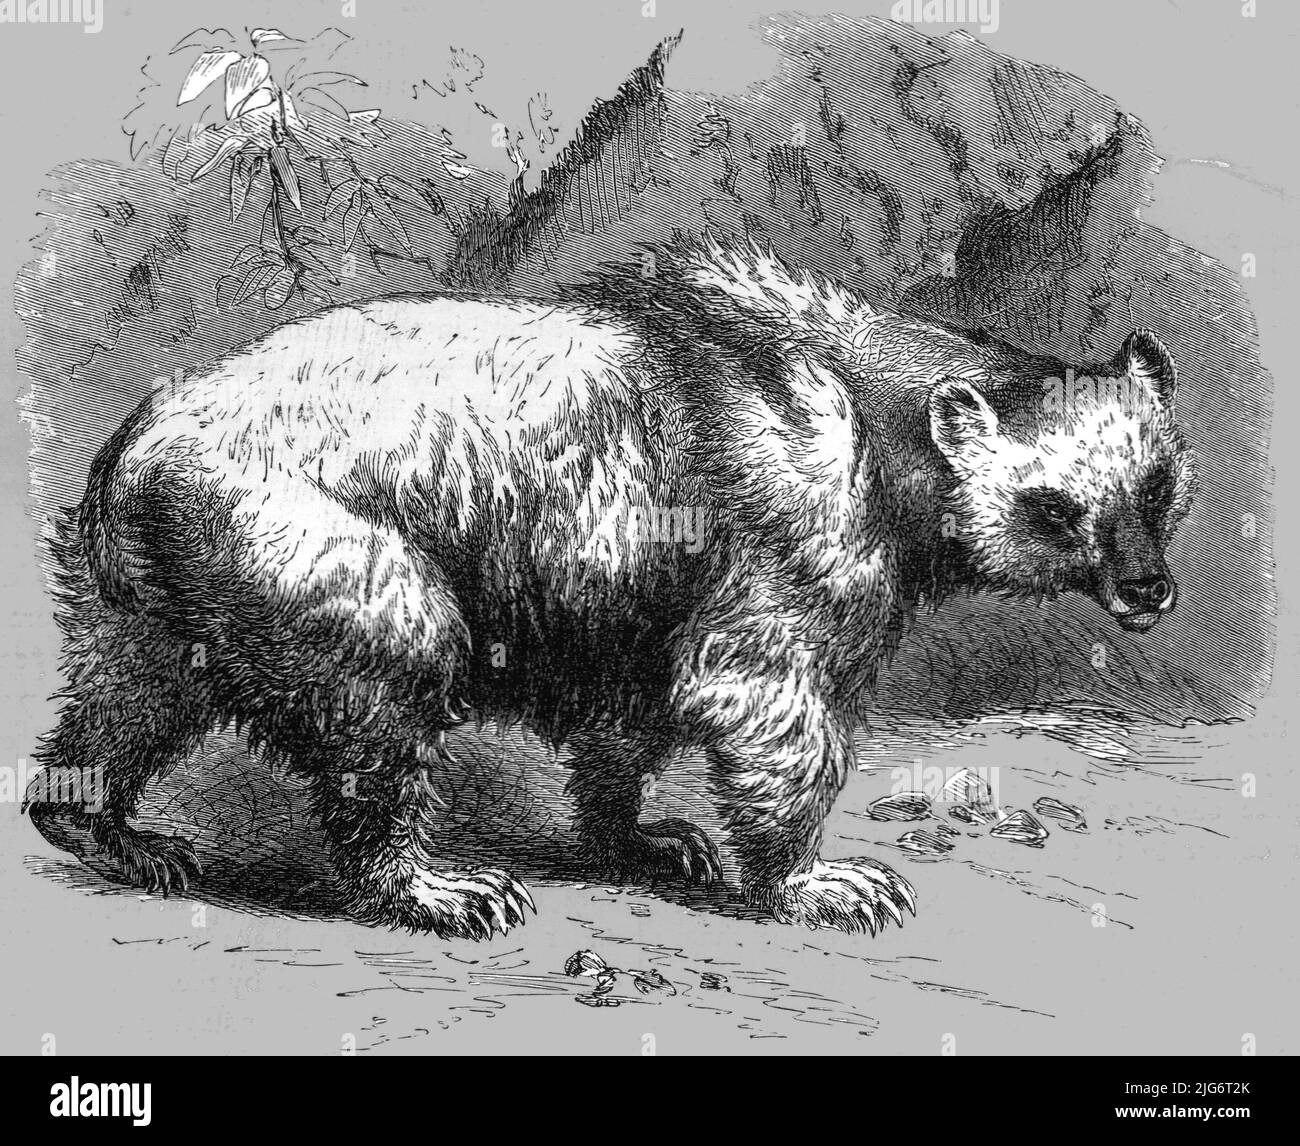 'The Brown Bear; Notes of a Naturalist in the North-Western Provinces of India', 1875.  From, 'Illustrated Travels' by H.W. Bates. [Cassell, Petter, and Galpin, c1880, London] Belle Sauvage Works.London E.C. Stock Photo